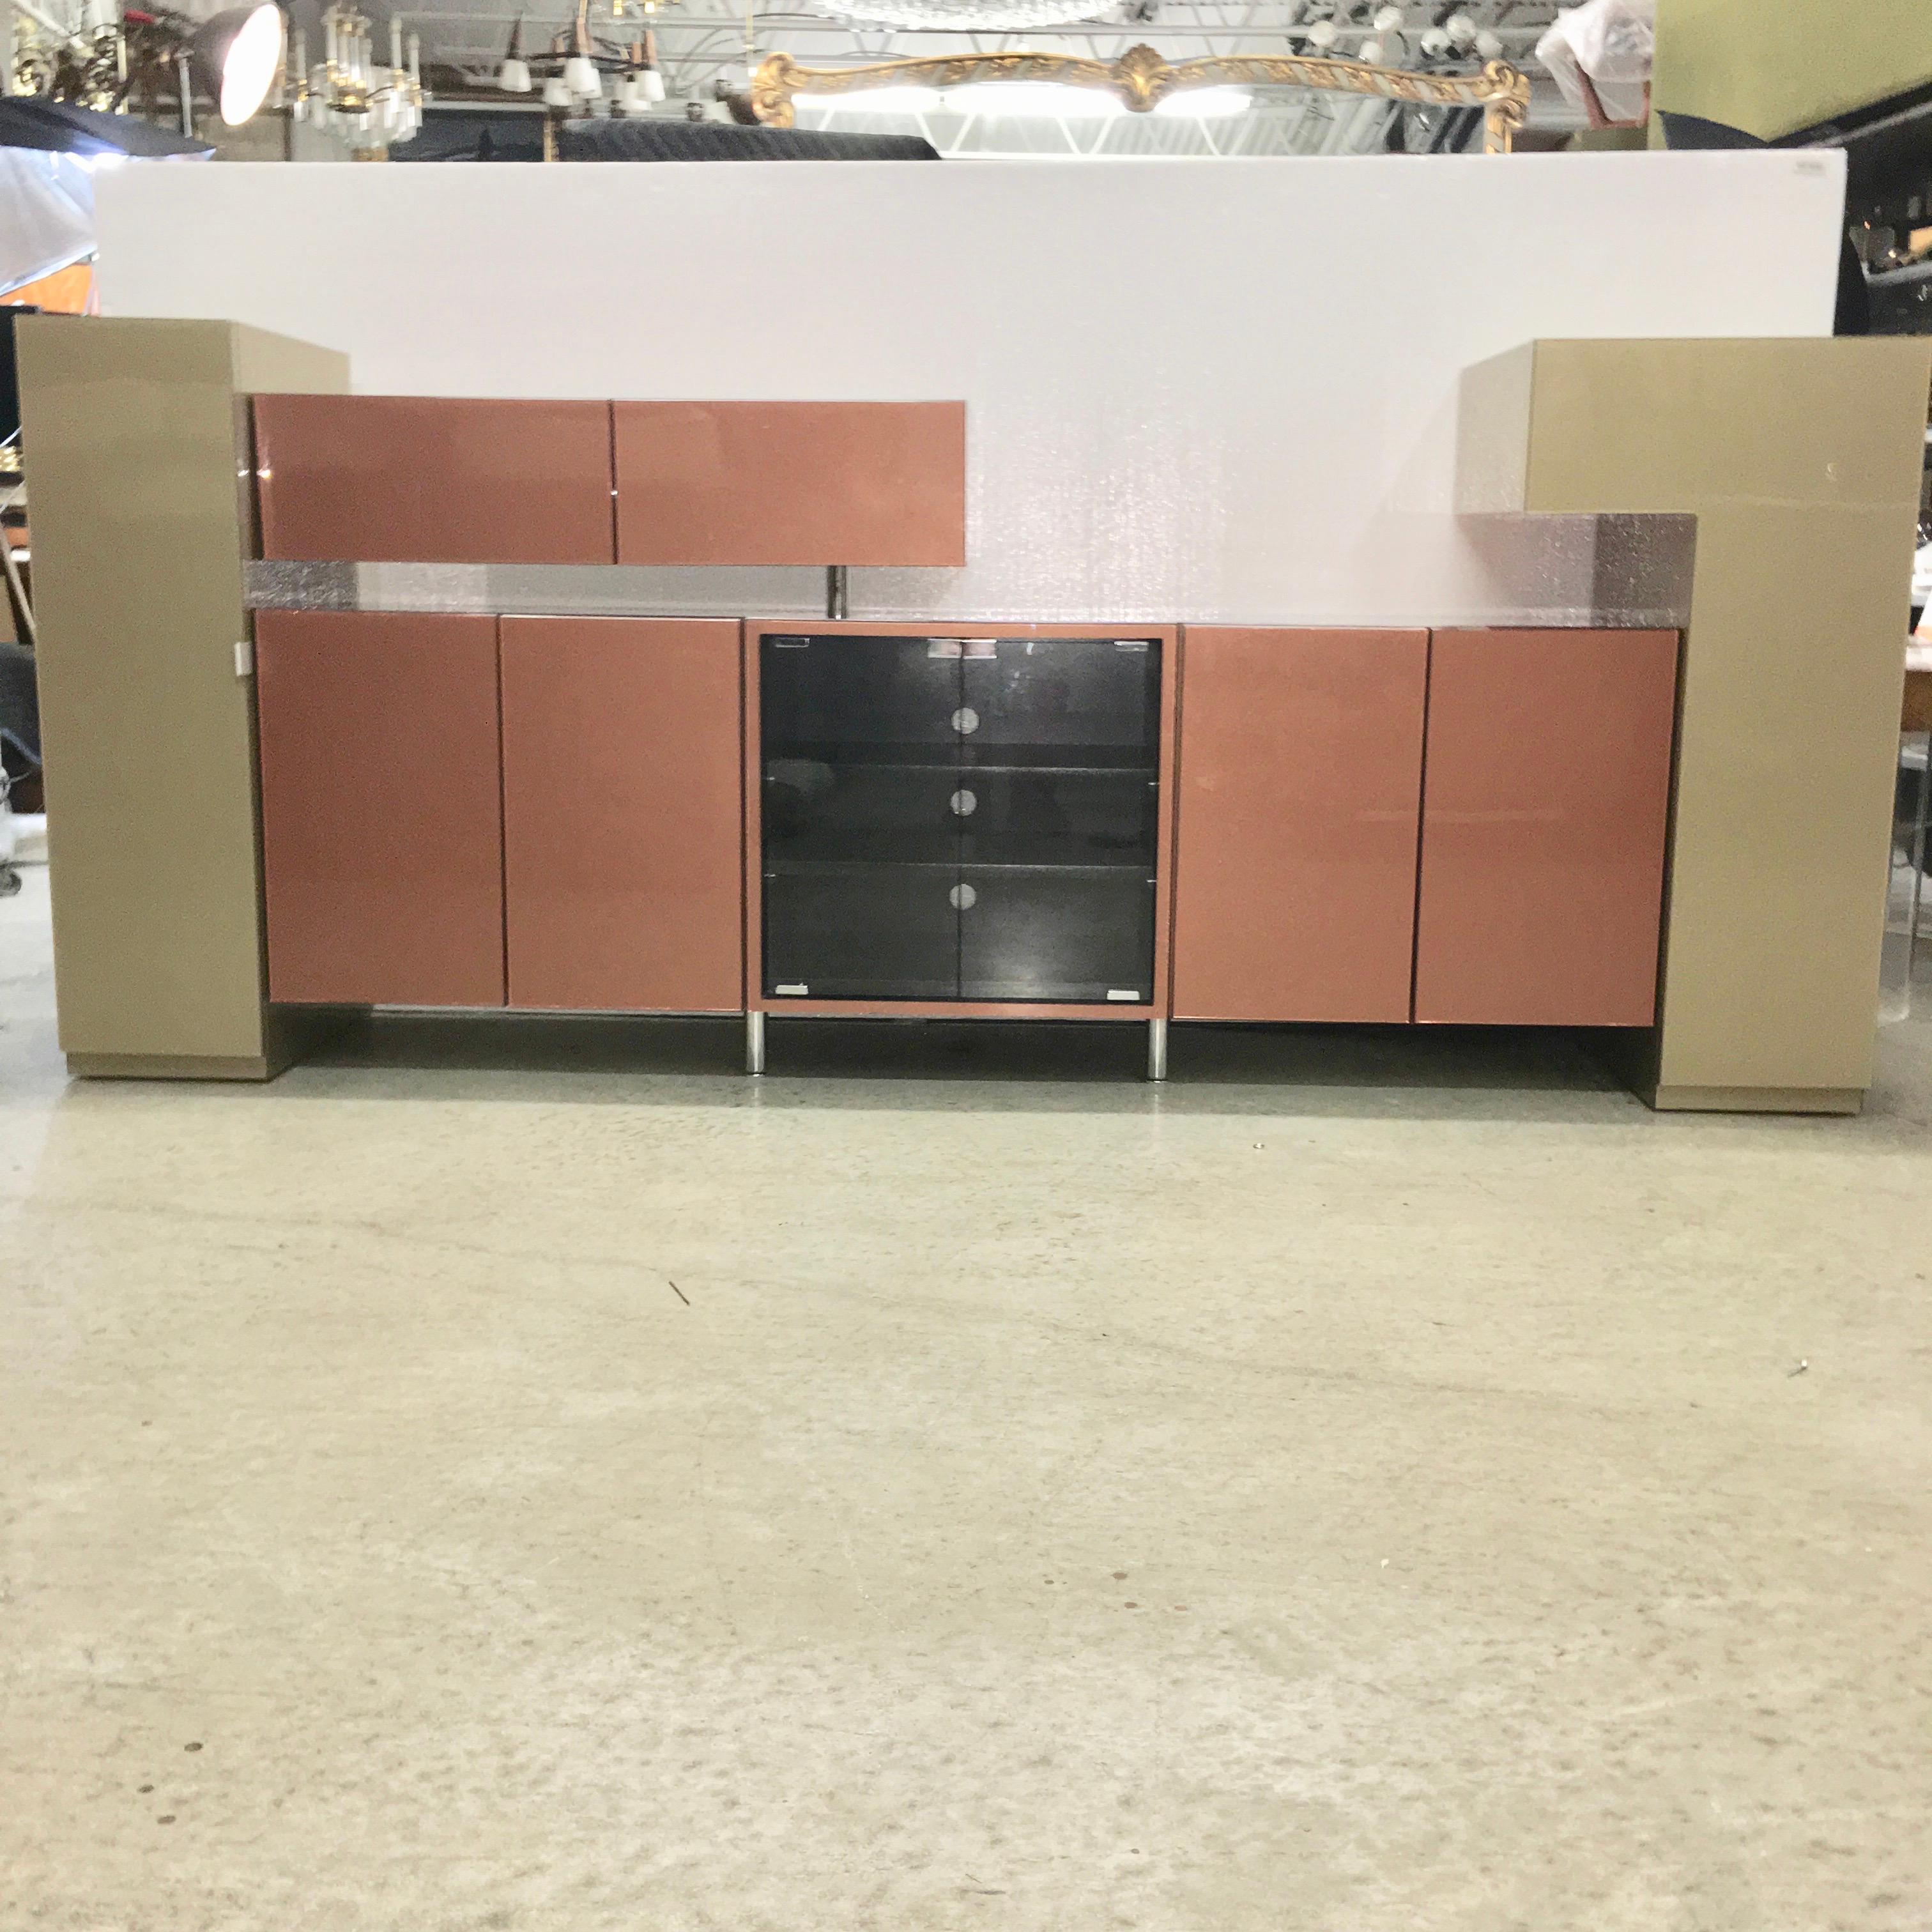 Media console cabinet is clad in a deluxe glossy laminate with metallic sage green and metallic copper under a clear glossy epoxy-like finish. It is a special Formica type material I've never seen before. No damage, no dings, no flaws. Chrome